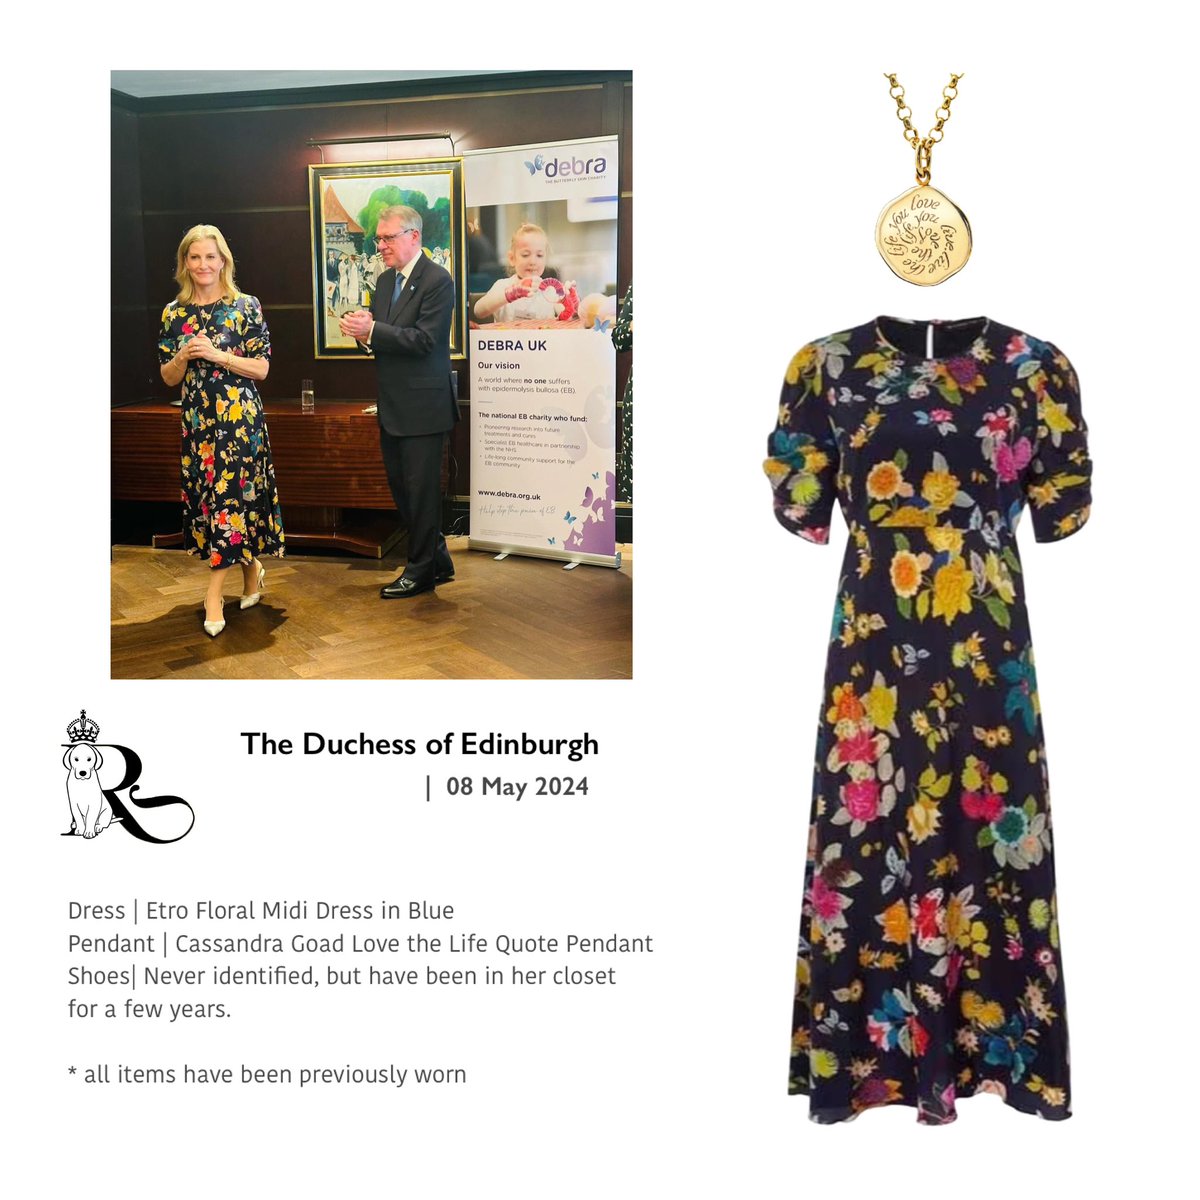 Yesterday, The Duchess of Edinburgh, as Patron of DEBRA UK, attended a Reception at the Beaumont in London.
#TheDuchessofEdinburgh #SuperSophie